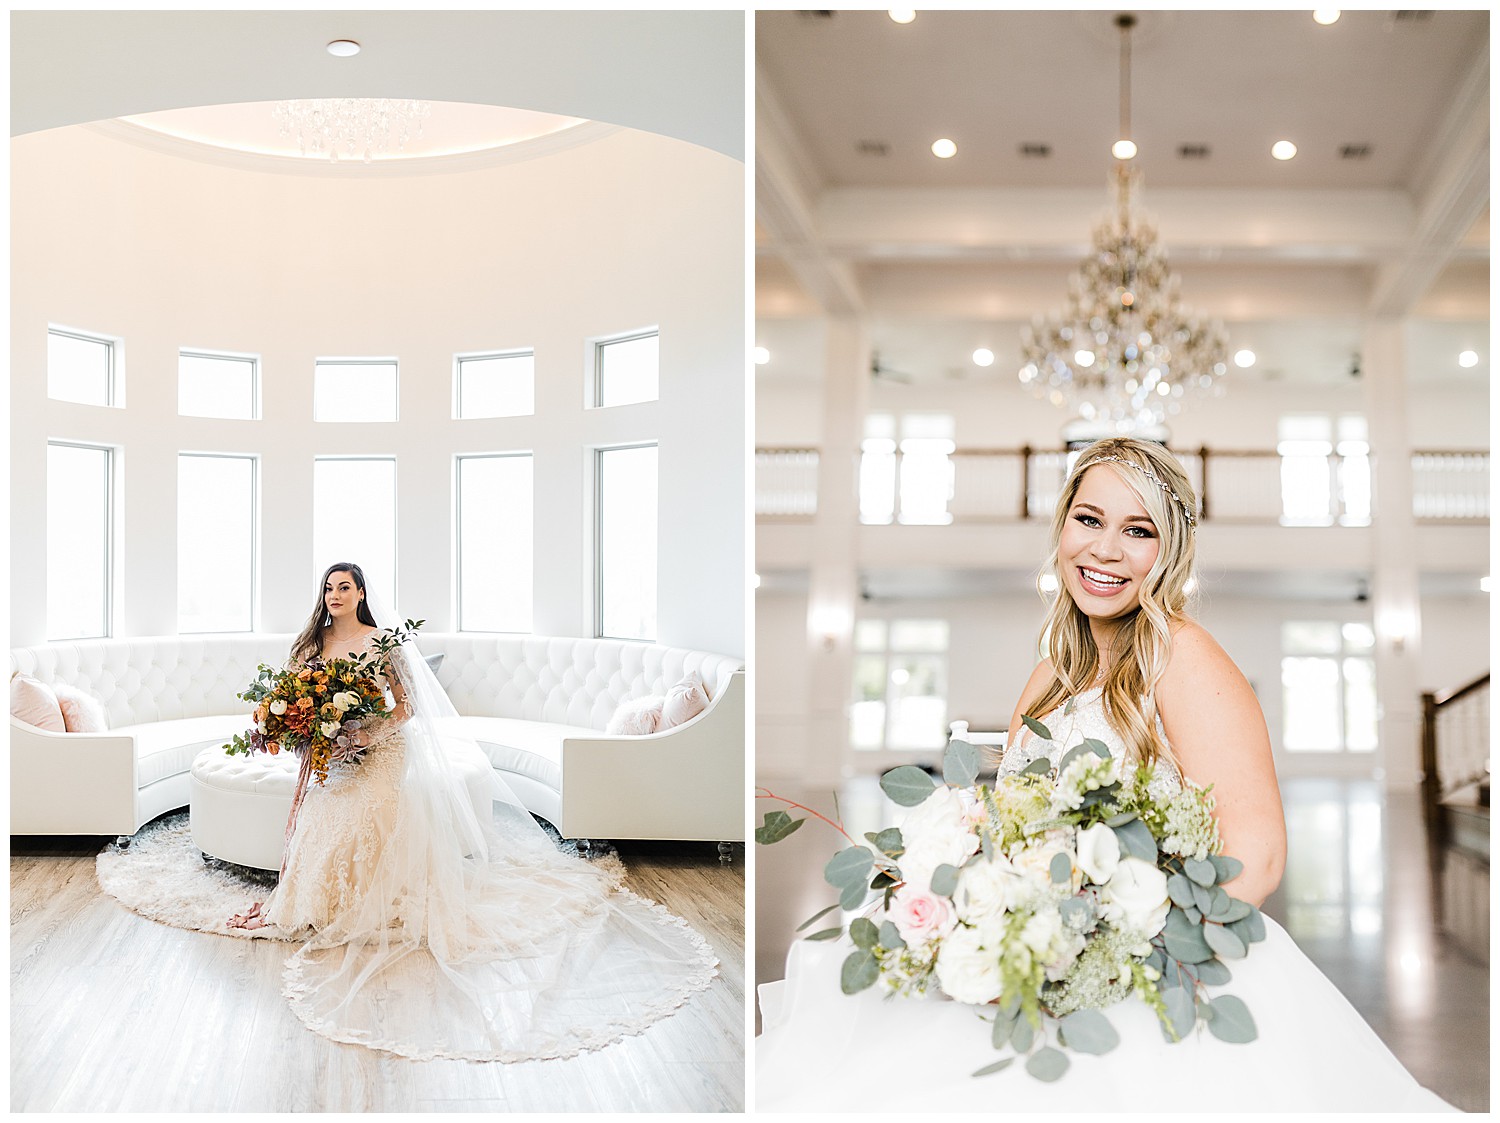 Bride photos at Knotting Hill Place in Dallas, TX